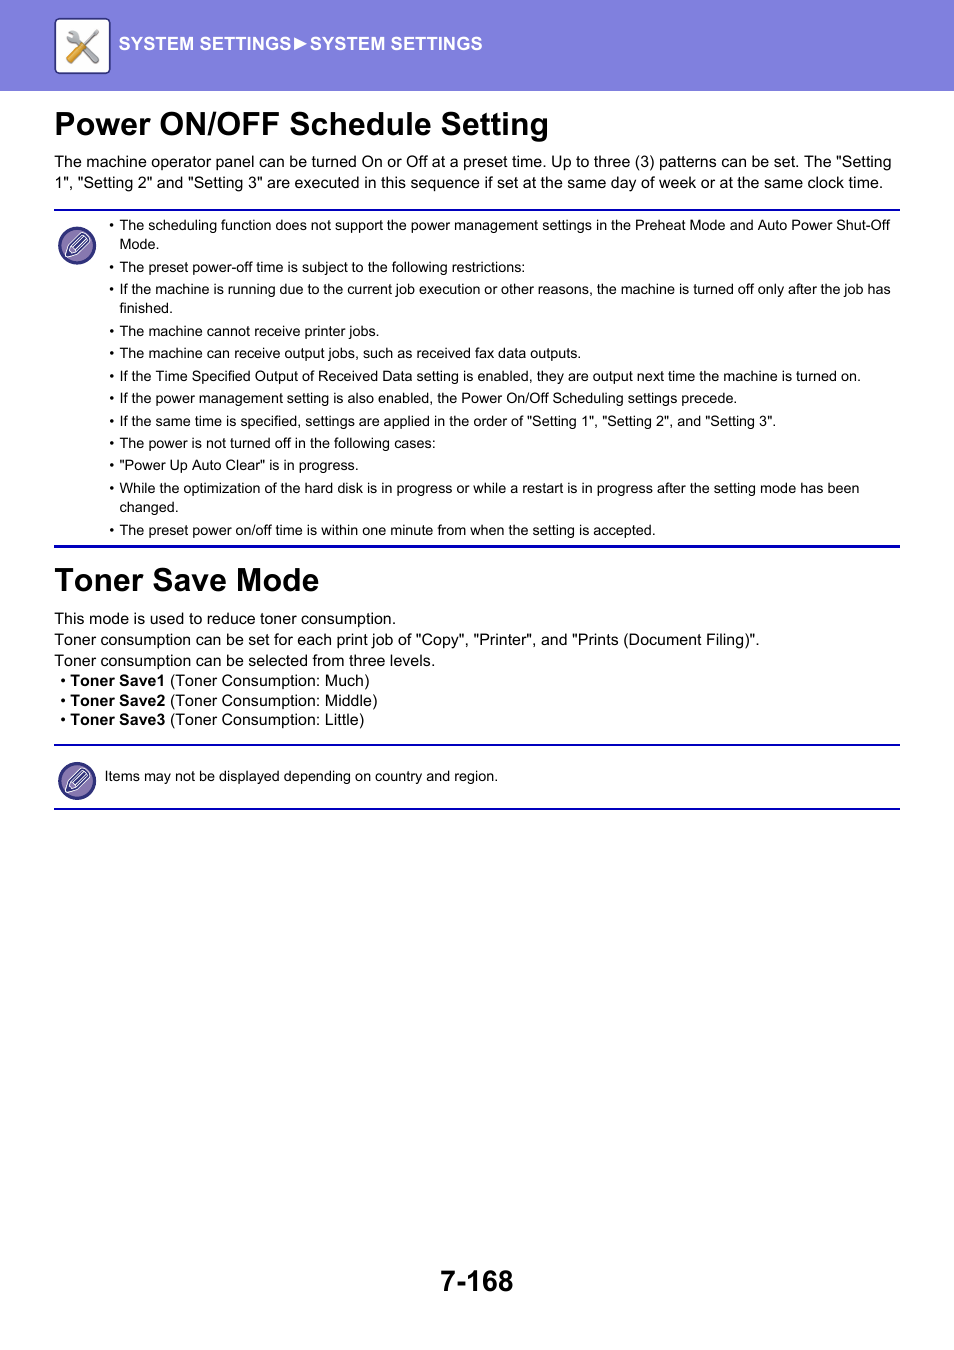 Toner save mode, Power on/off schedule setting -168, Toner save mode -168 | Power on/off schedule setting | Sharp MX-6070N User Manual | Page 883 / 935